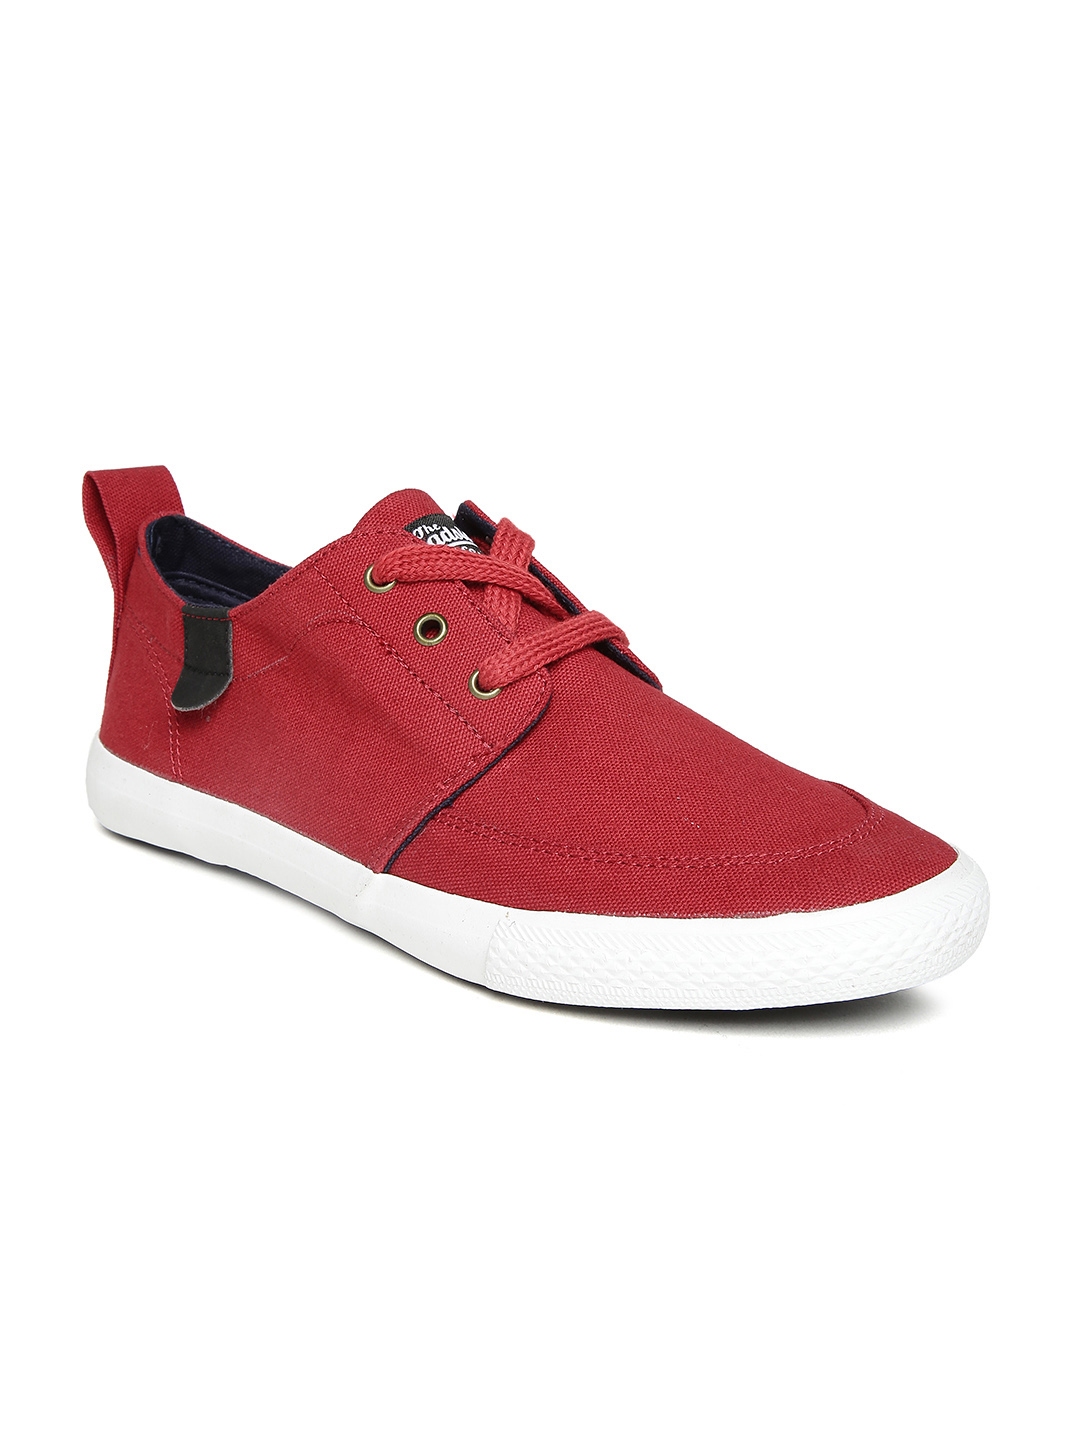 Buy Roadster Men Red Casual Shoes - Casual Shoes for Men 1176118 | Myntra